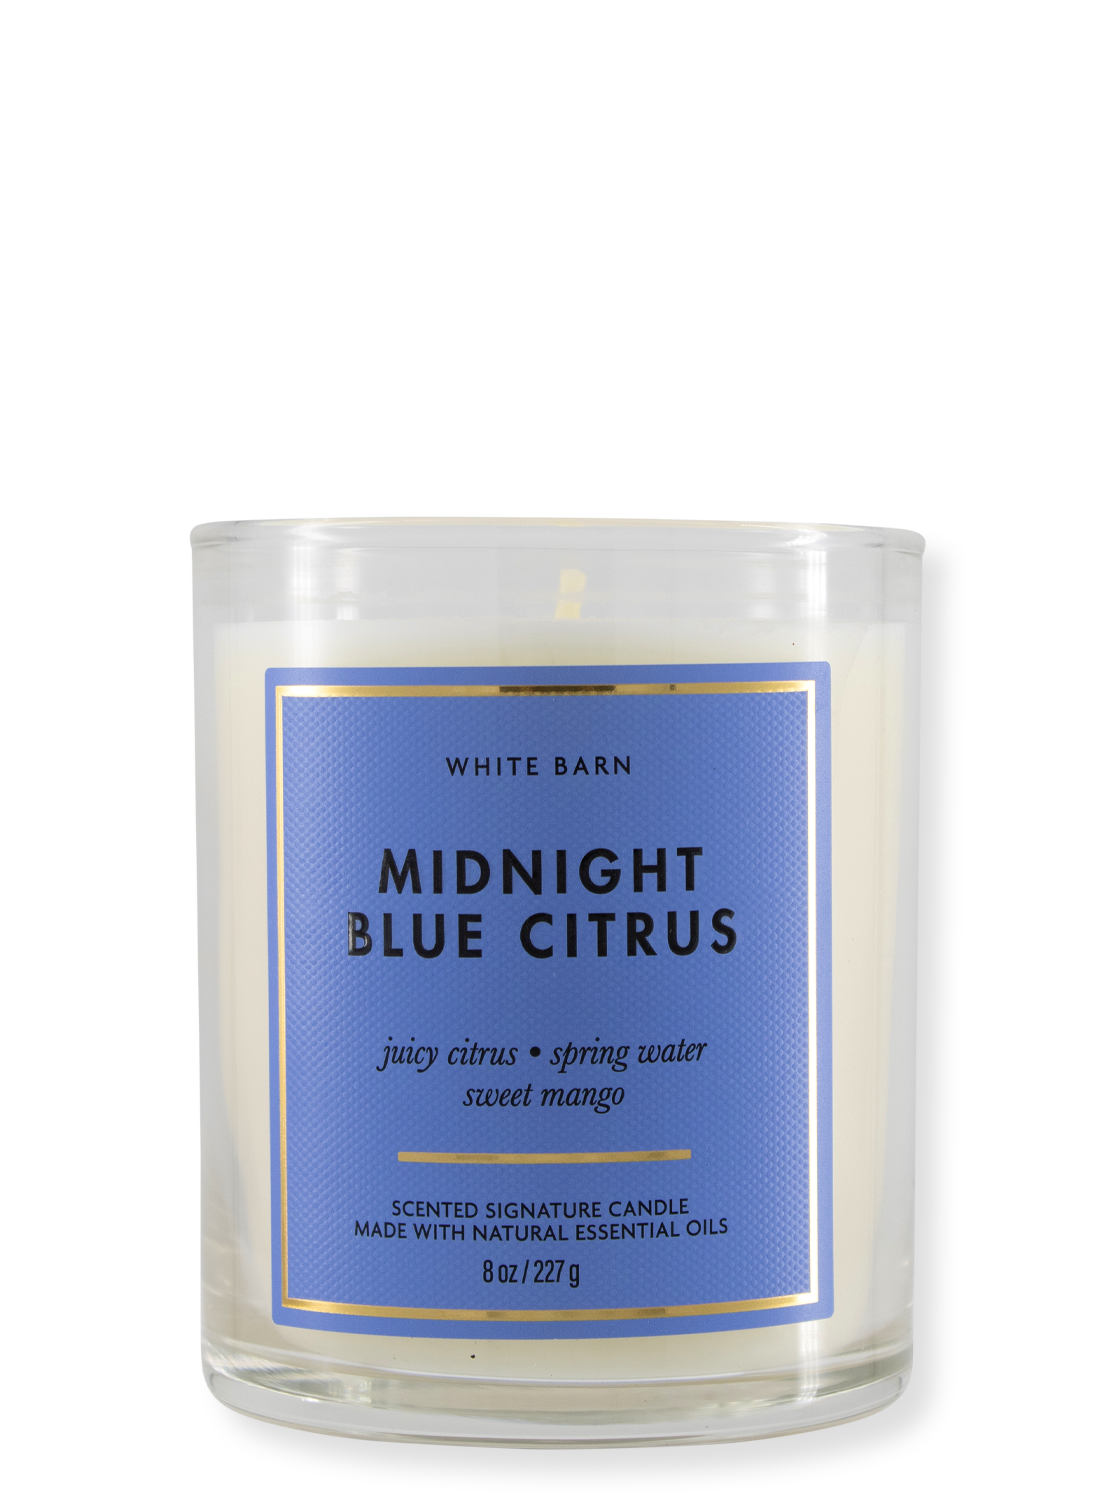 1-wick candle - Midnight Blue Citrus - 227g